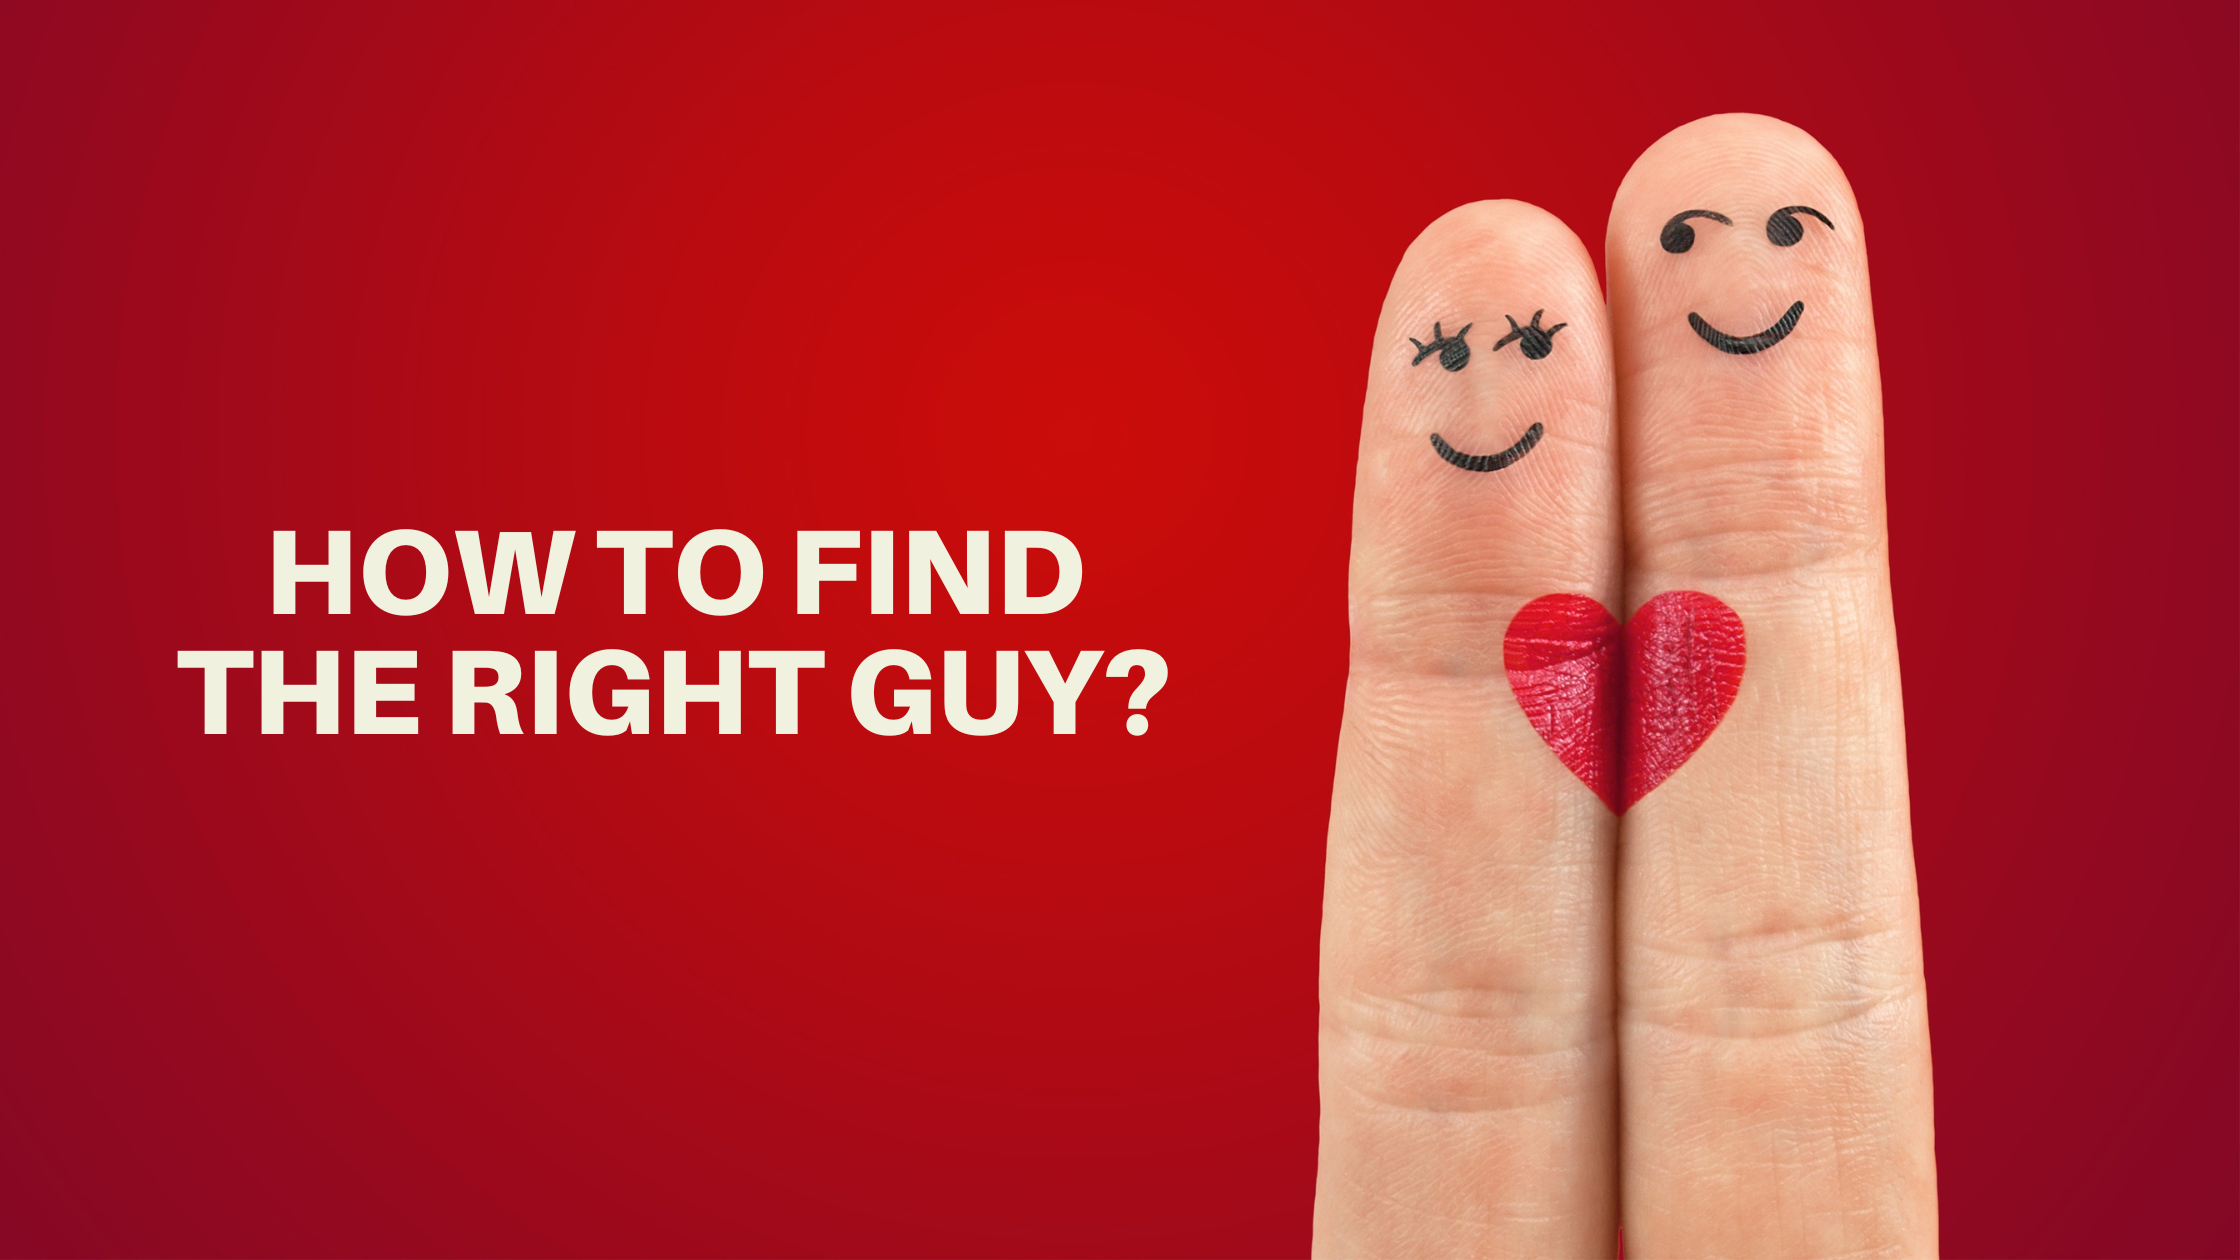 How to Find the Right Guy